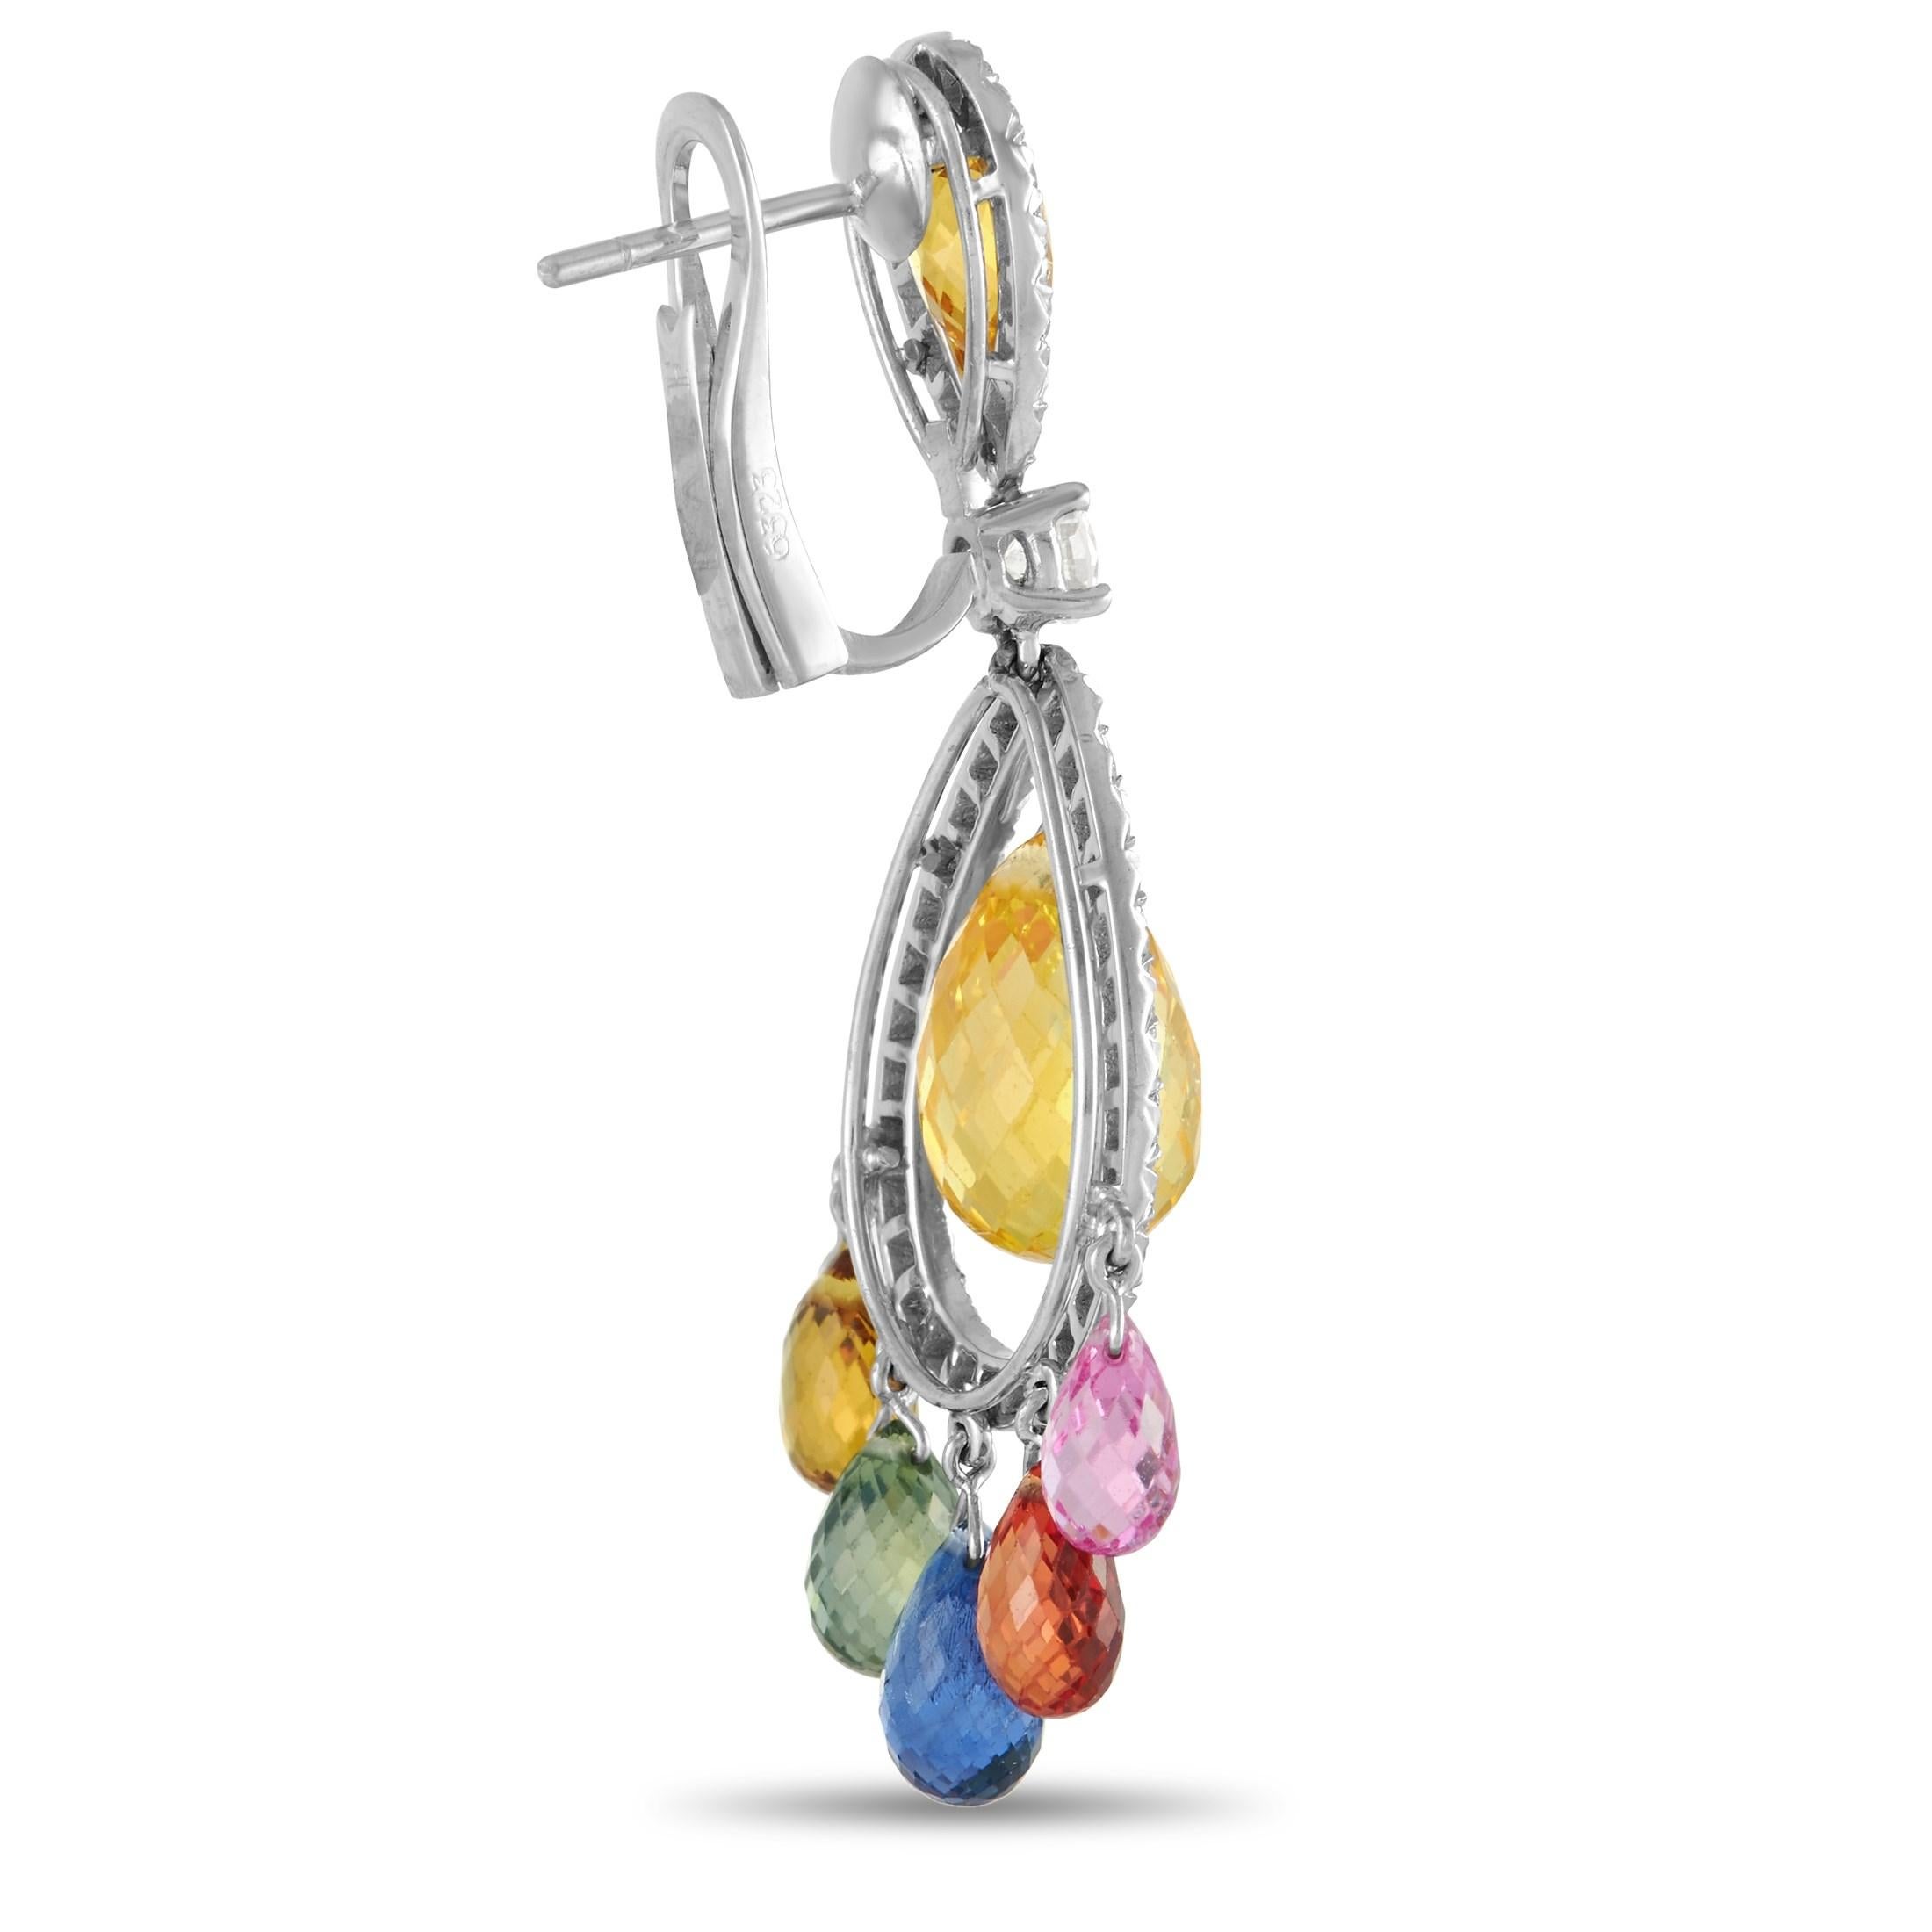 These pretty Graff dangle earrings are full of color. Each earring is crafted from 18K white gold and set with an estimated 1.20 carats of brilliant round diamonds of F color and VVS clarity throughout. The earrings are also set with an estimated